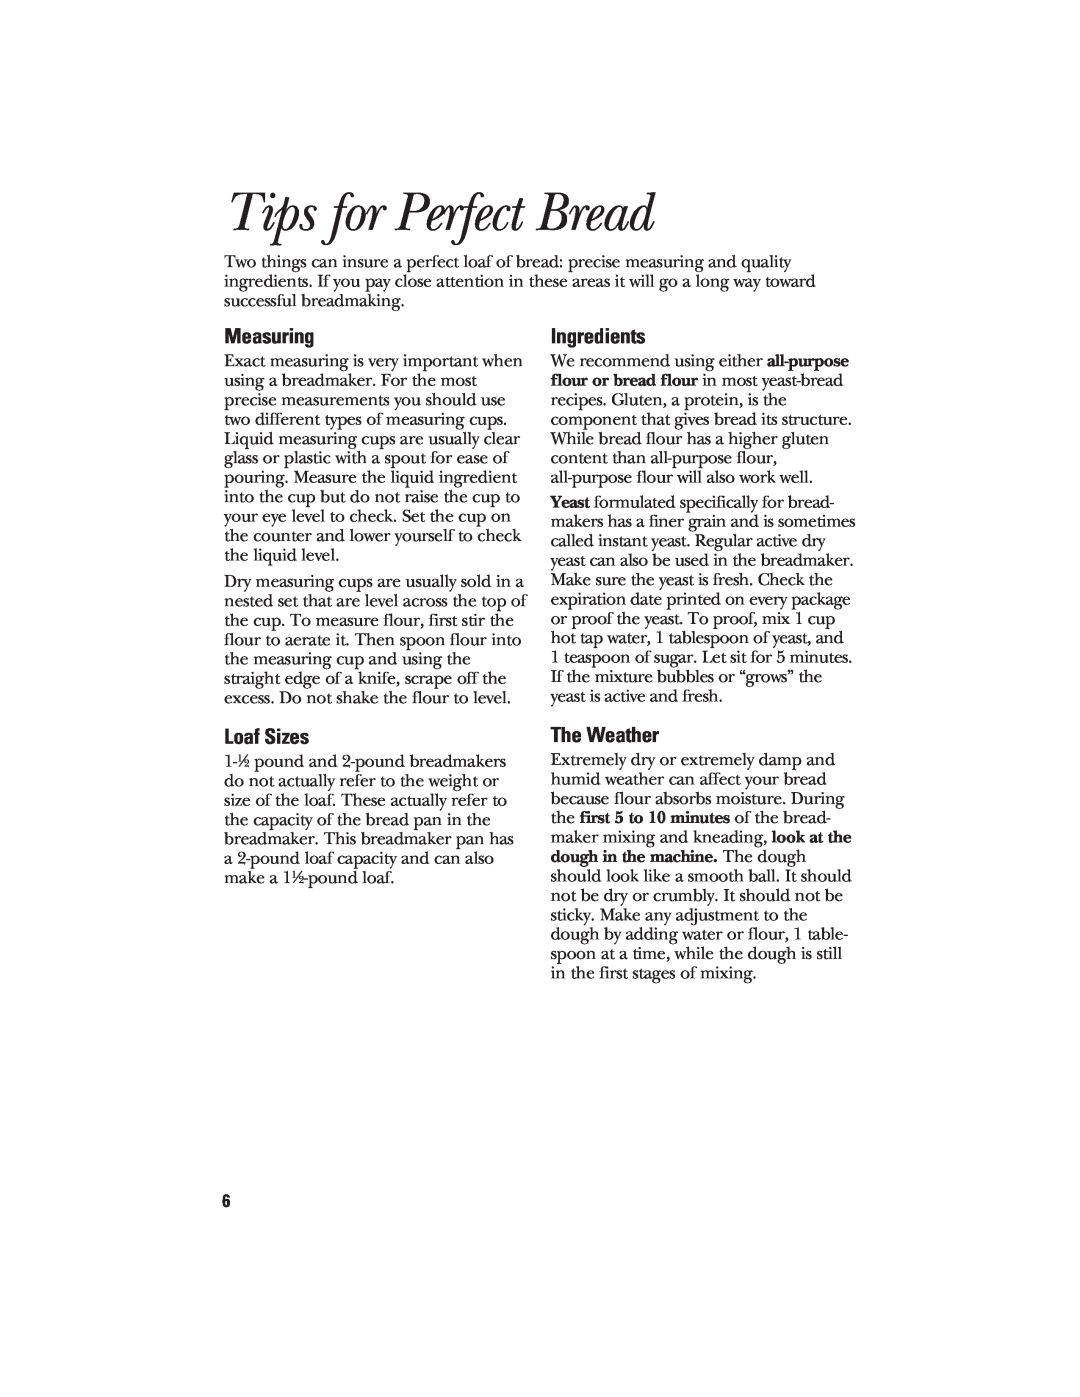 GE 840081500 quick start Tips for Perfect Bread, Measuring, Ingredients, Loaf Sizes, The Weather 